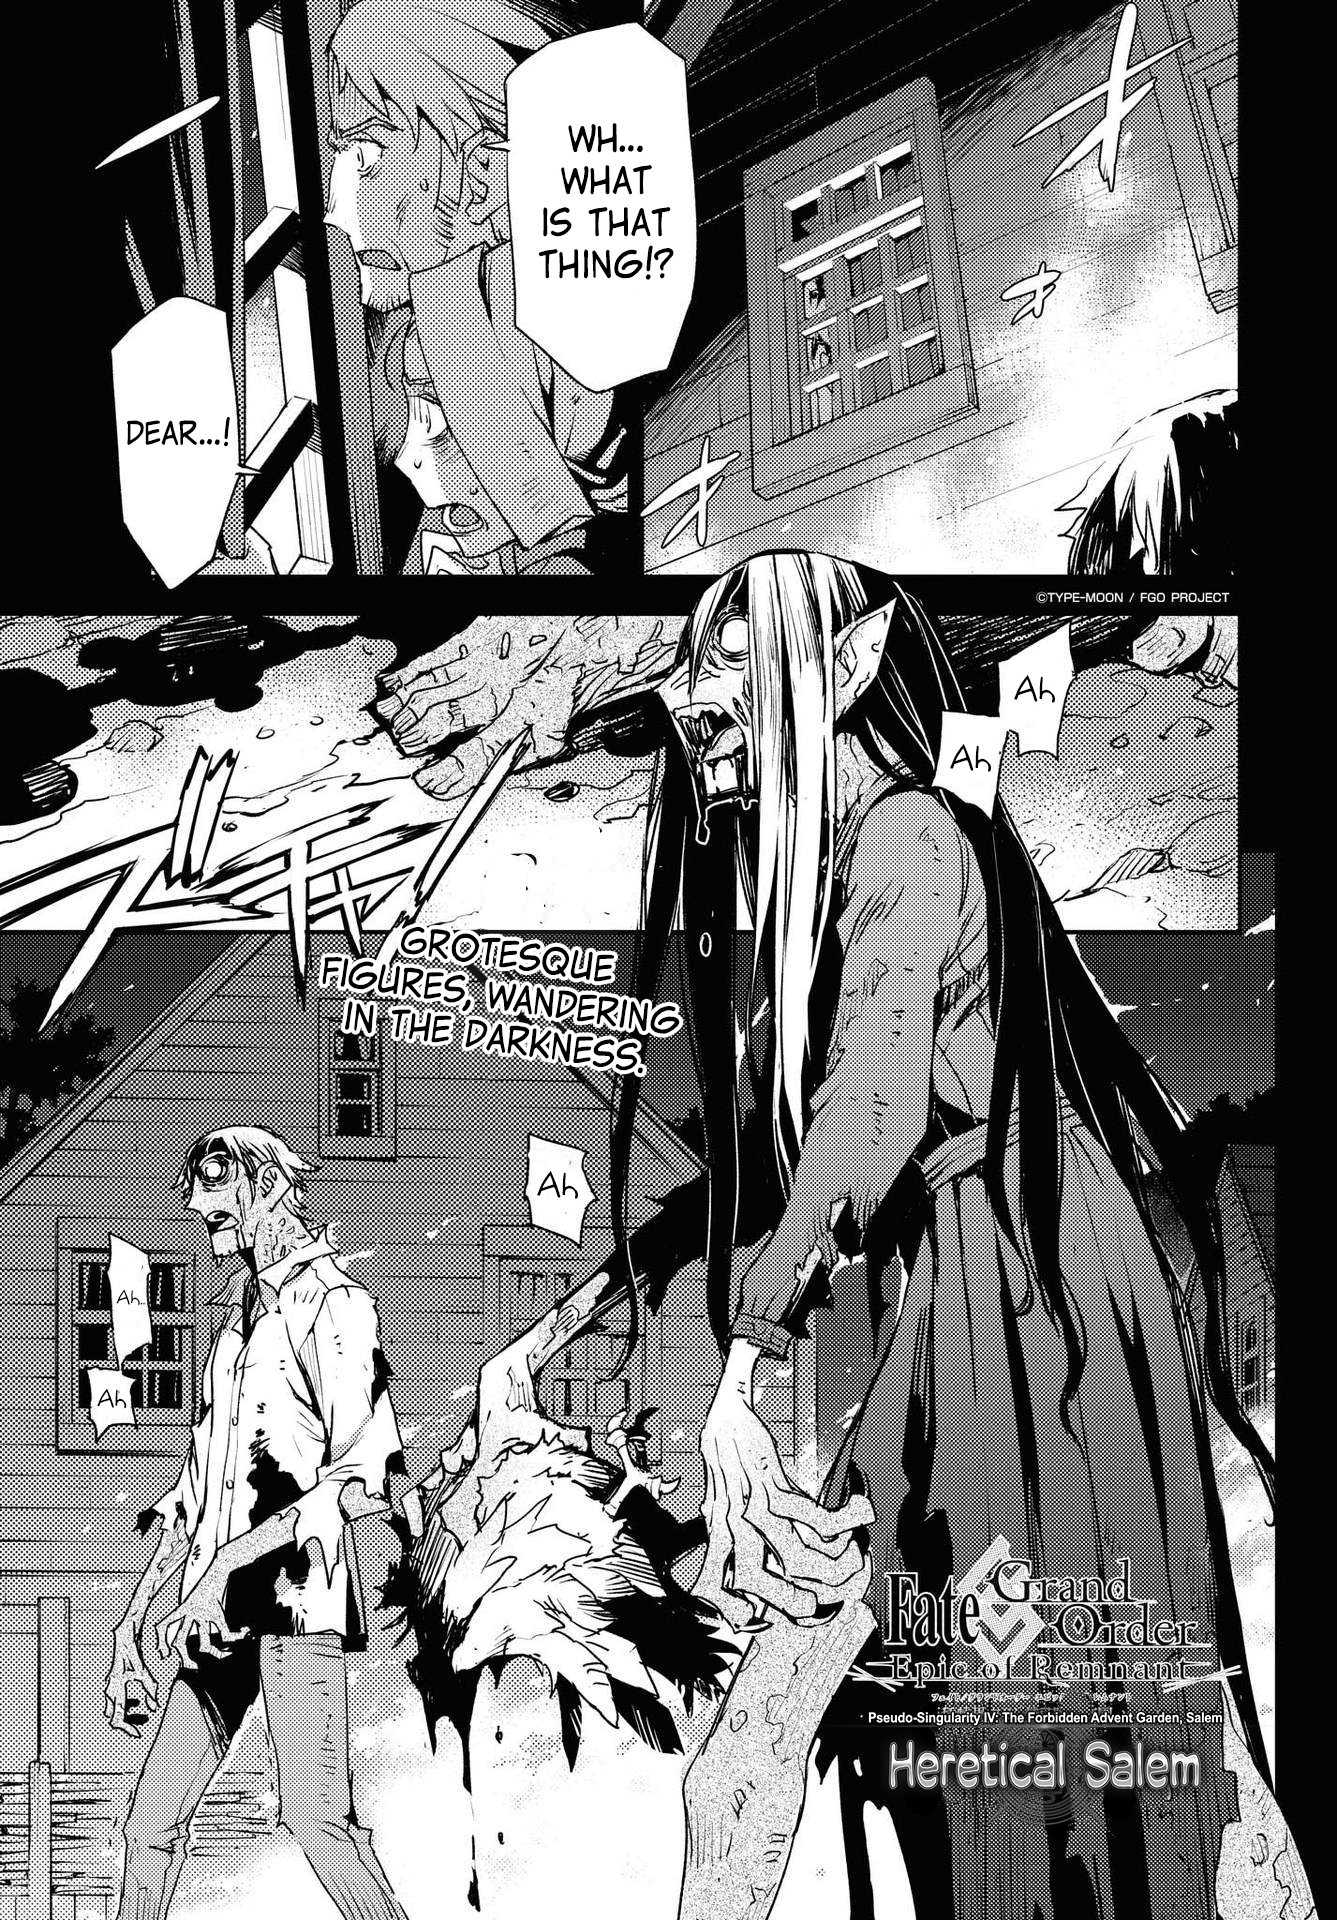 Fate/grand Order: Epic Of Remnant: Pseudo-Singularity Iv: The Forbidden Advent Garden, Salem - Heretical Salem Chapter 16: The First Knot - 6 - Picture 1